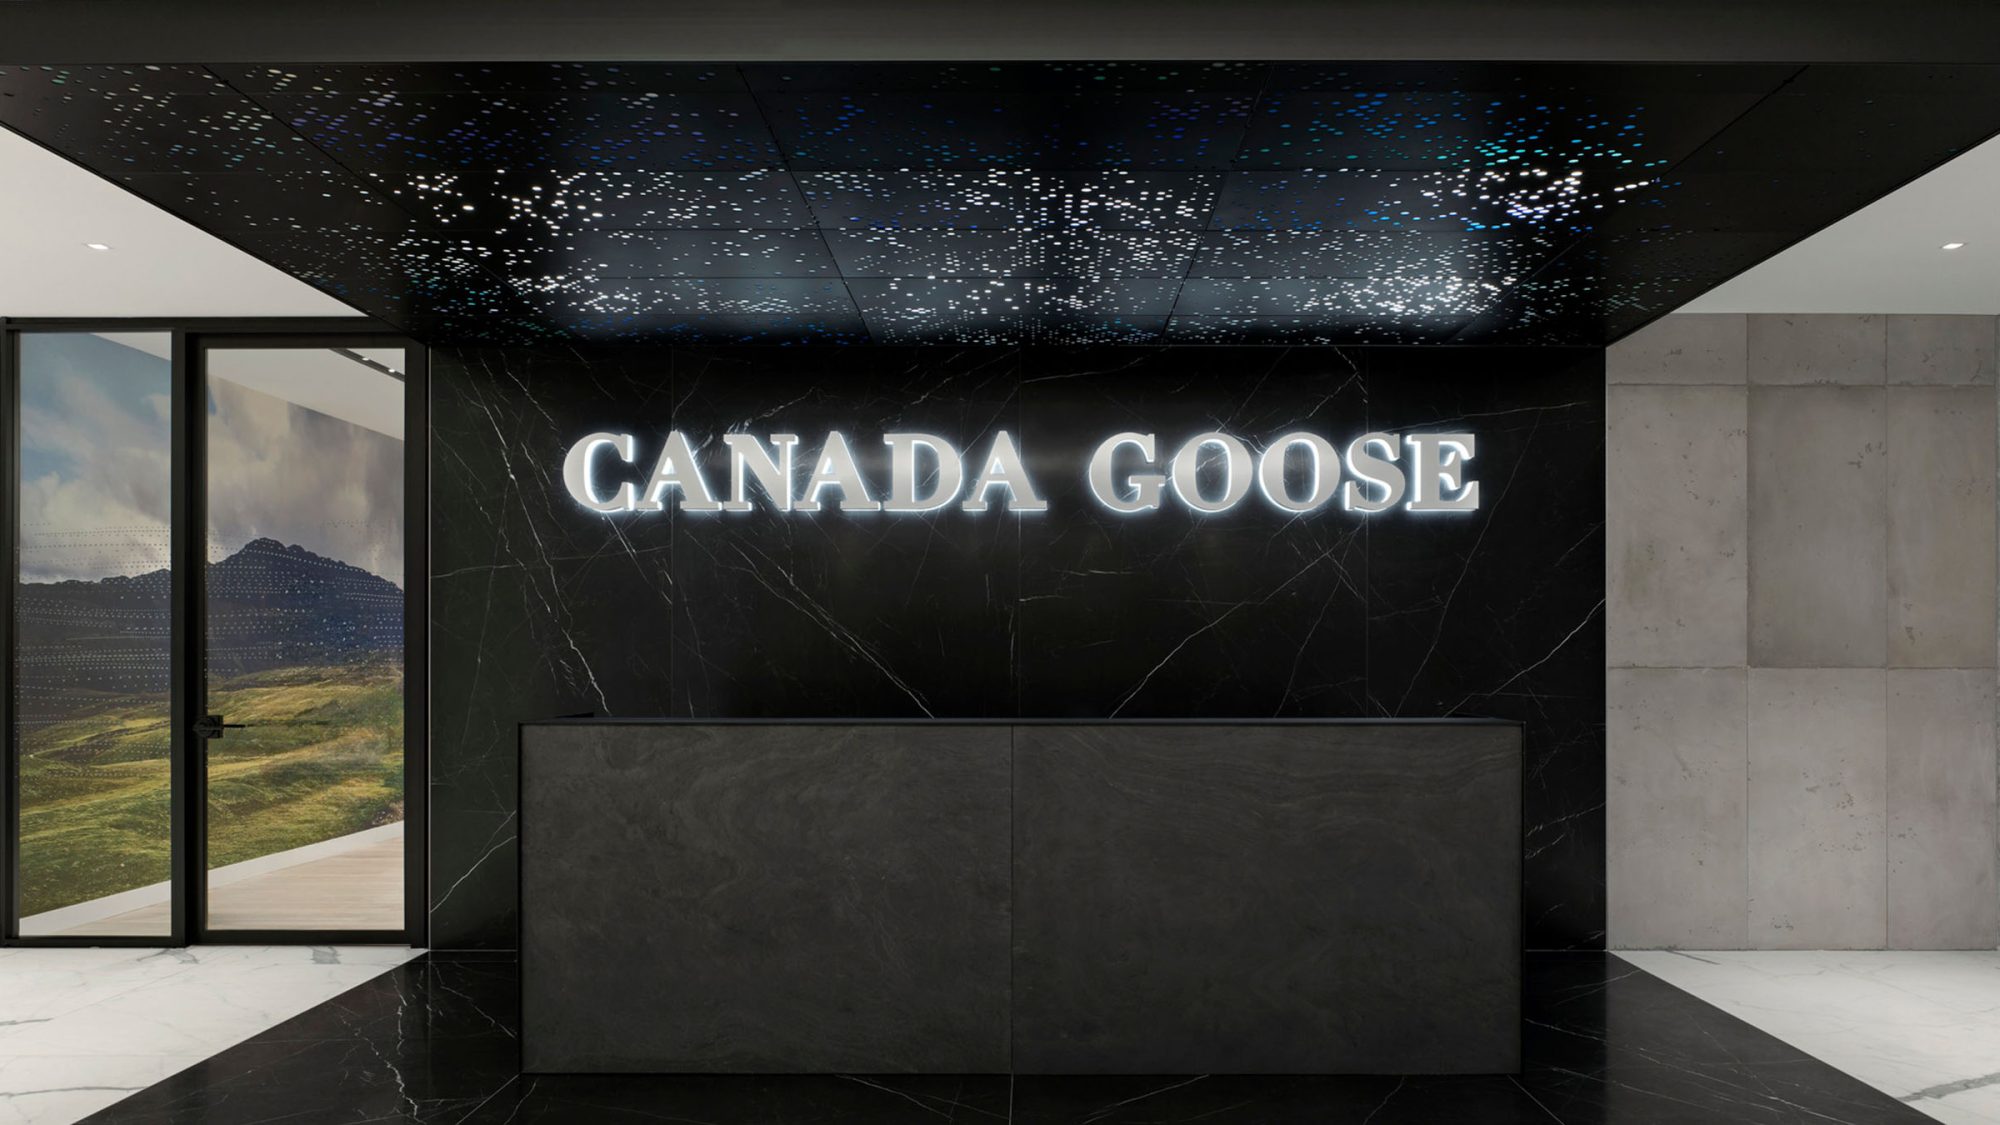 Interior design project by M Moser for Canada Goose in Toronto featuring a branded reception area and Northern Lights installation.